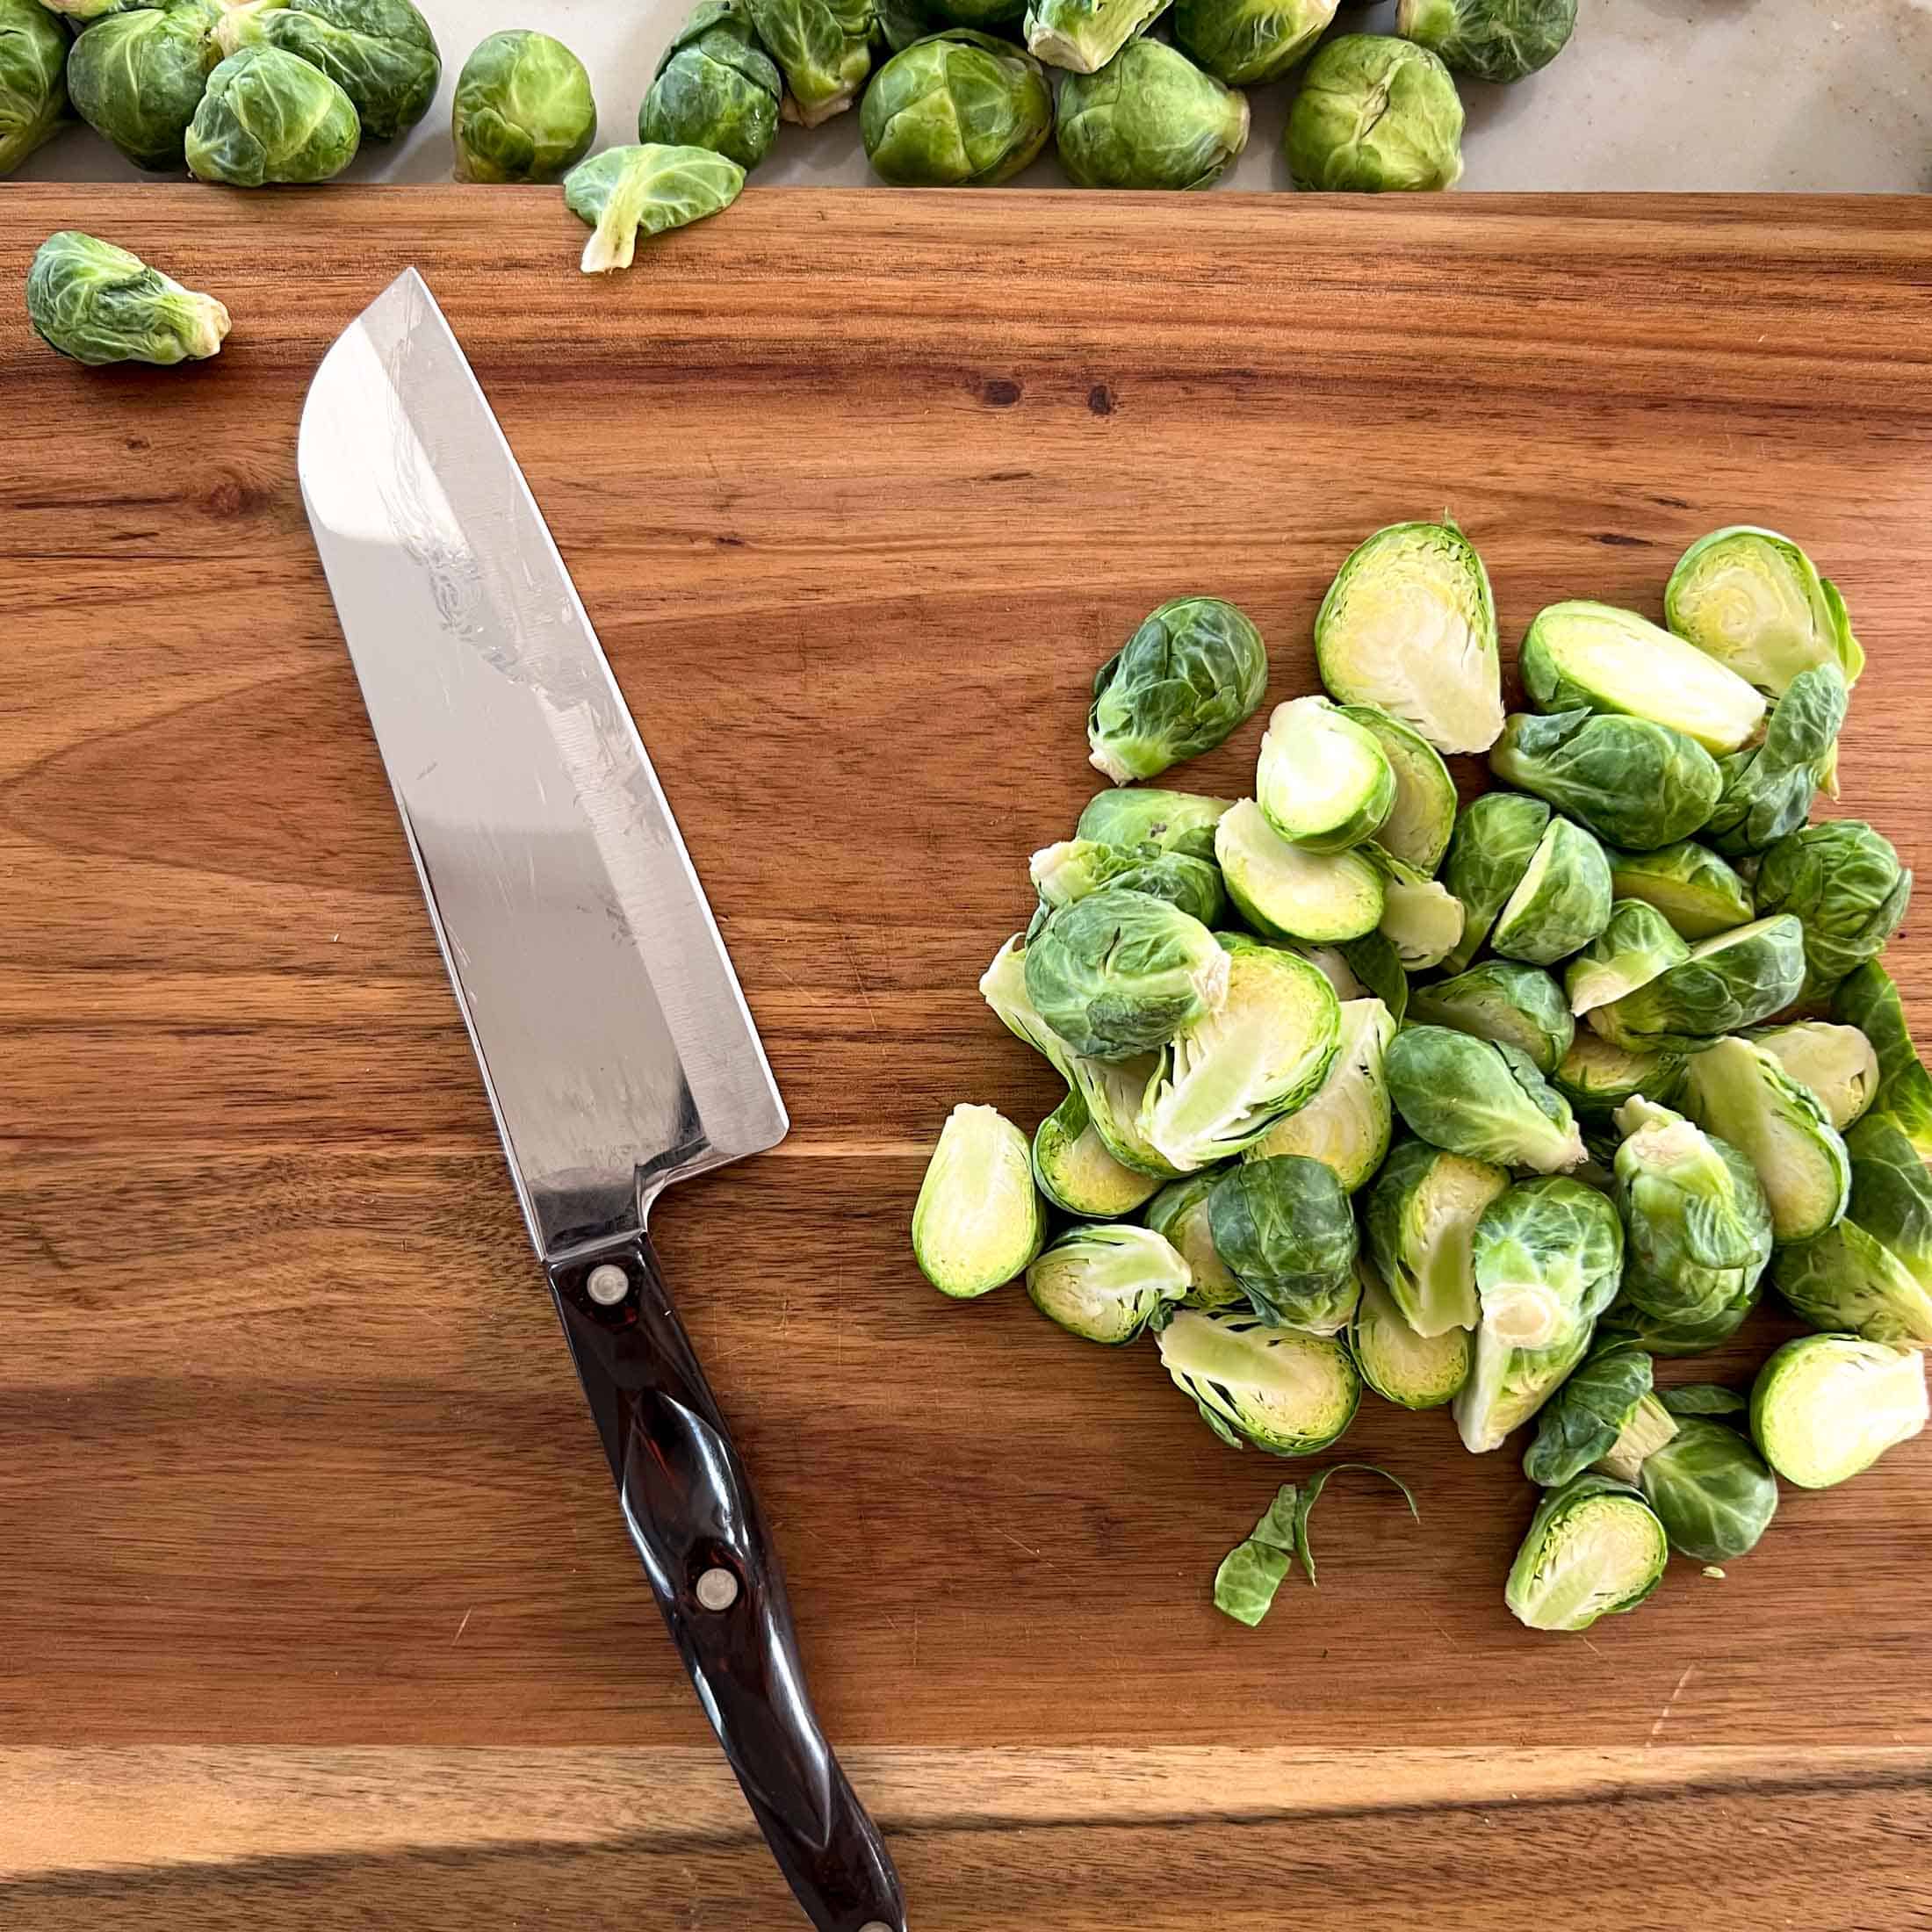 Raw brussel sprouts cut in half.